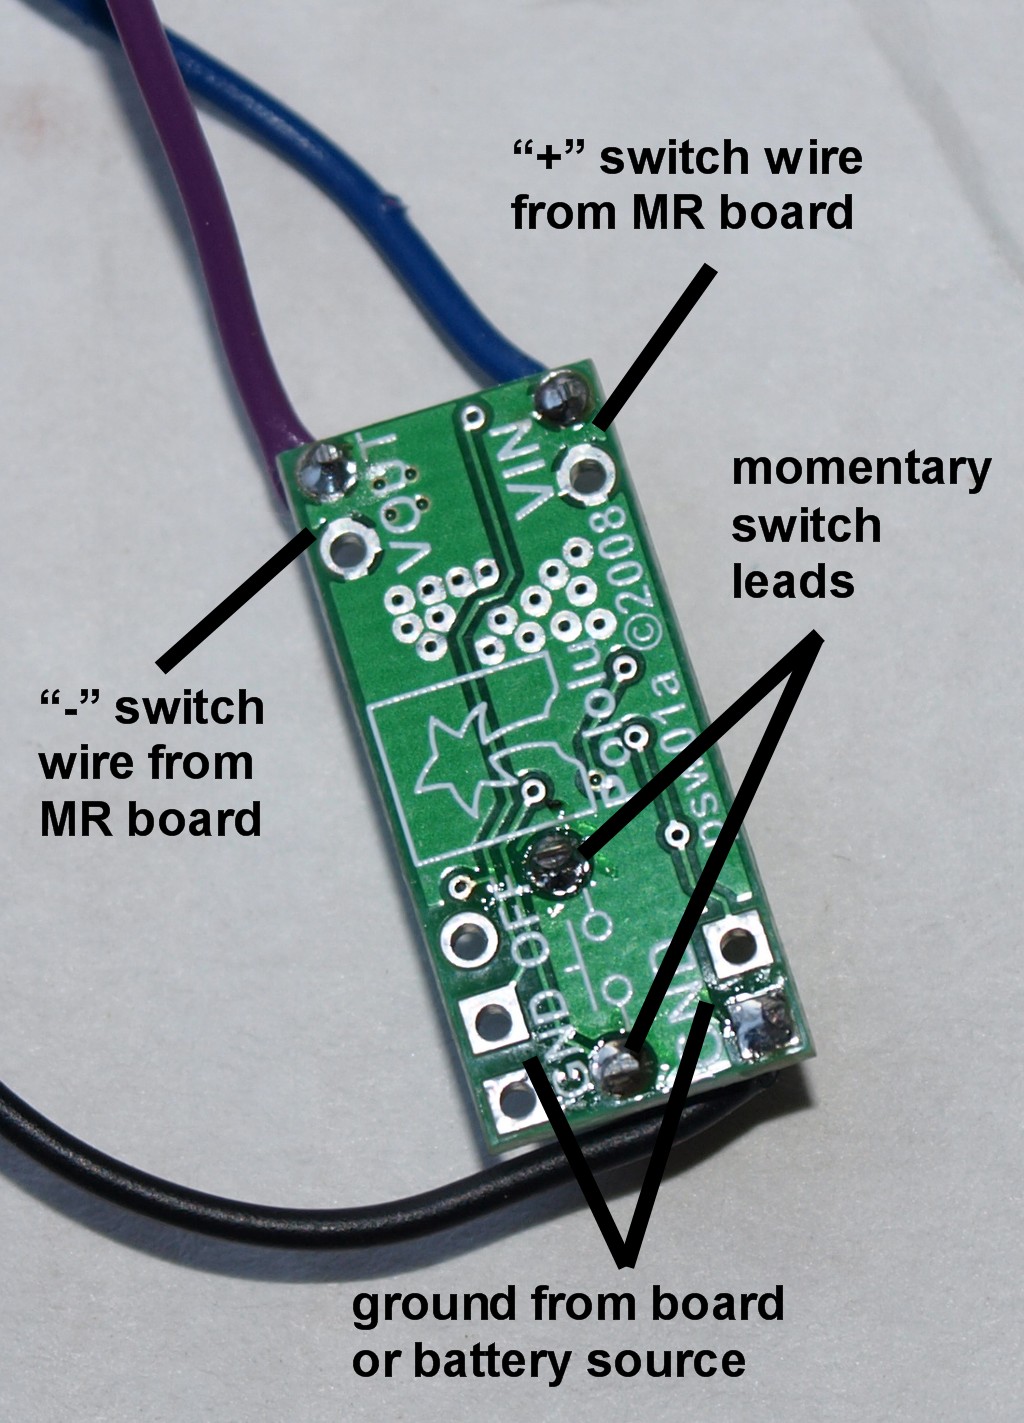 How to hook up a Pololu momentary to latching board for MR board